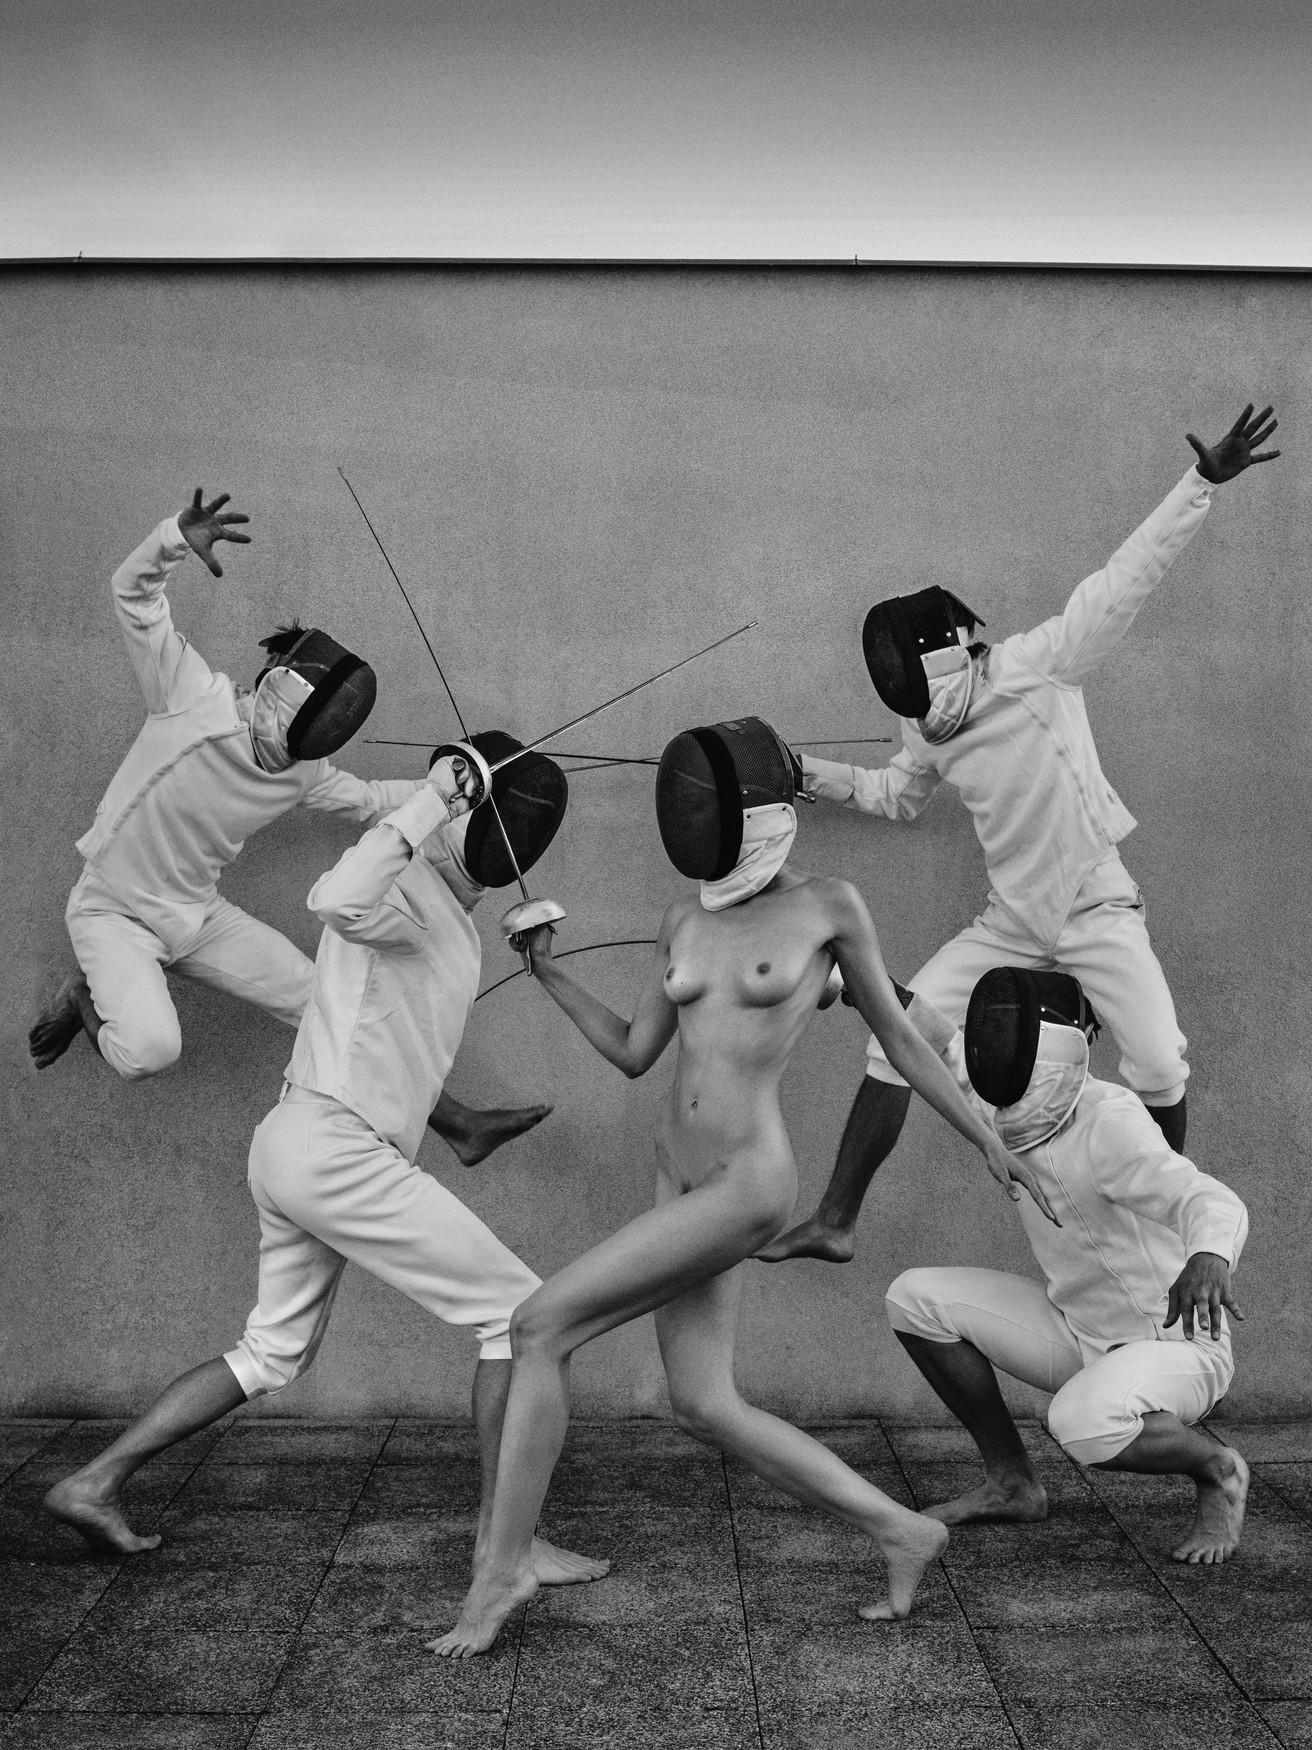 "Fencers 1" Photography 35" x 31.5" inch  Edition of 5 by Lukas Dvorak 

Pigment print on Epson Fine ART paper
2015

Ships rolled in a tube 

ABOUT THE ARTIST
Lukas Dvorak is a Czech photographer born in Prague in 1982. His preference goes to black